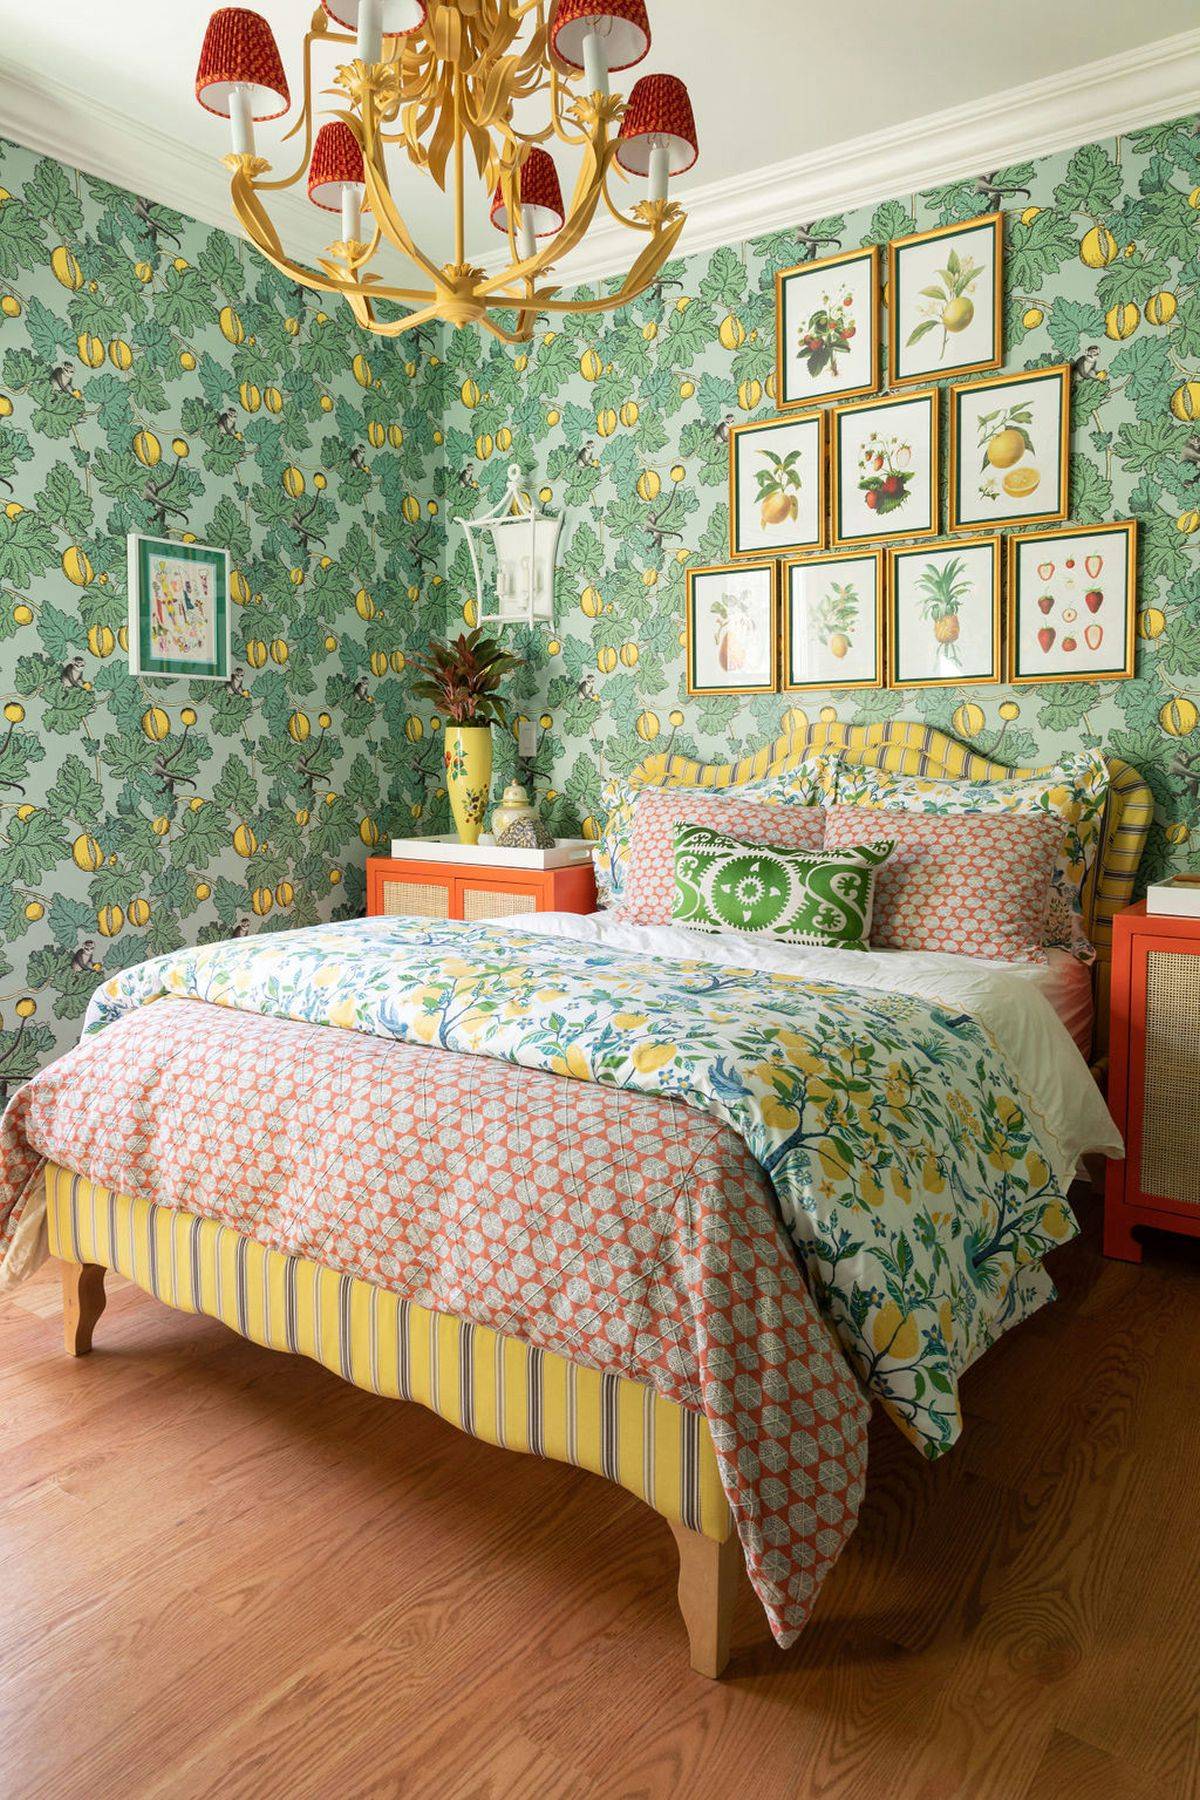 Vivacious-leafy-patterns-are-back-with-a-bang-in-bedrooms-this-season-15139